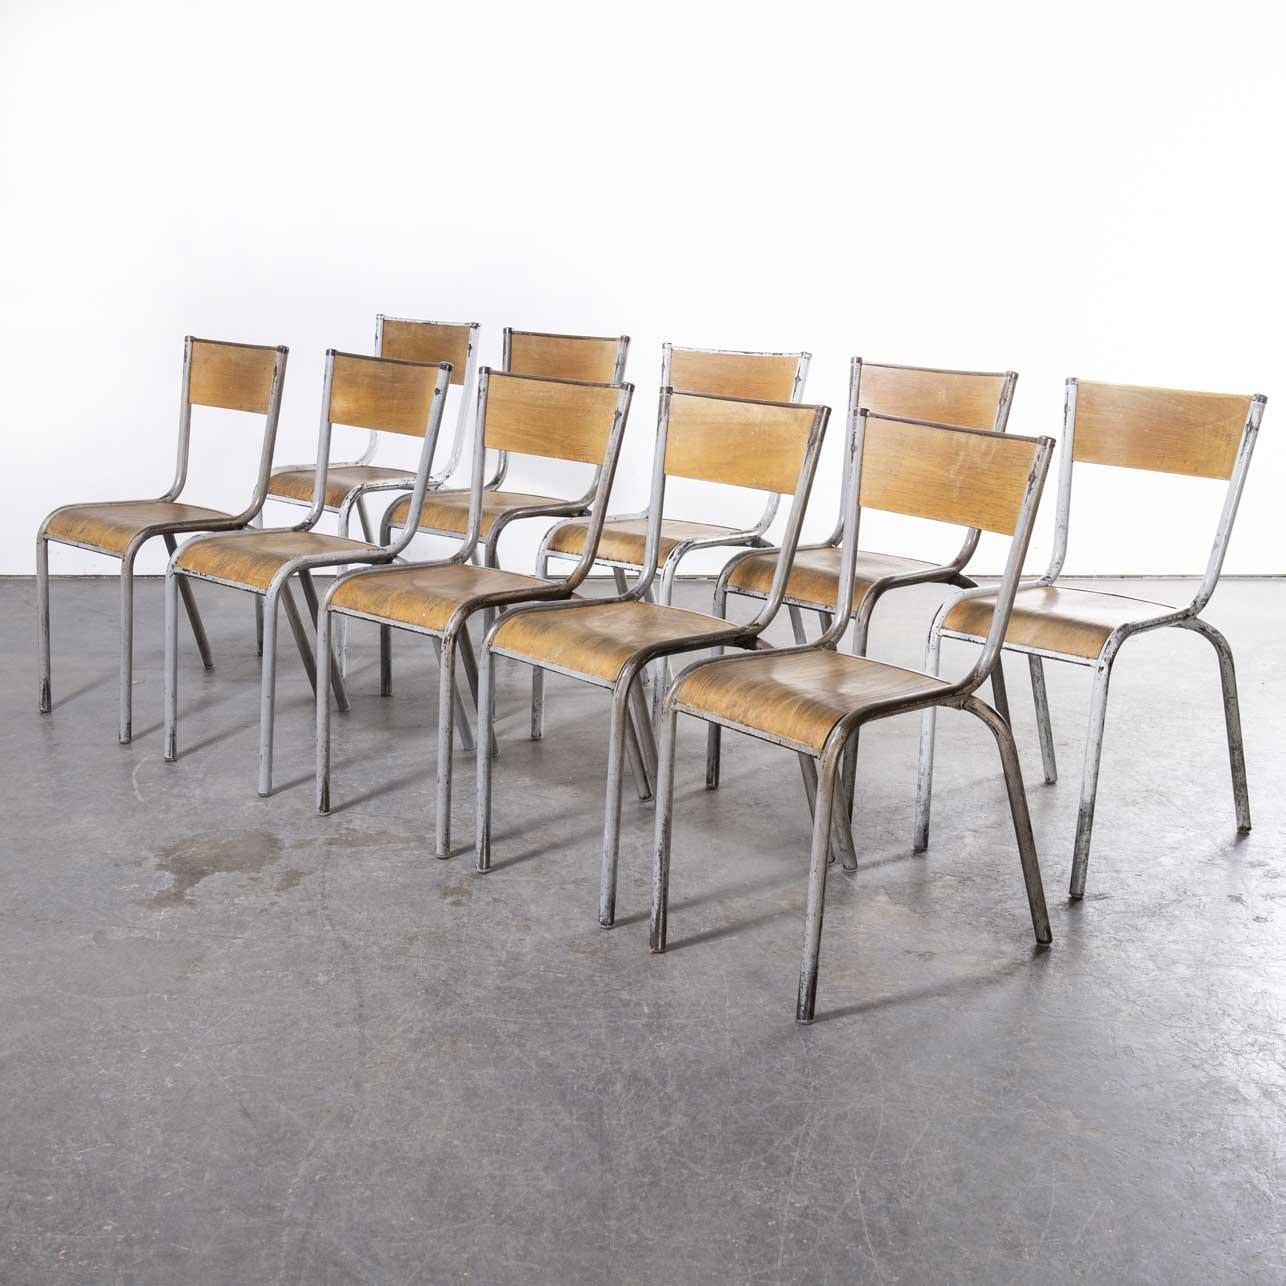 1950’s French Mullca Light Grey Stacking Dining Chairs – Set Of Ten
1950’s French Mullca Light Grey Stacking Dining Chairs – Set Of Ten. One of our most favourite chairs, in 1947 Robert Muller and Gaston Cavaillon created the company that went on to